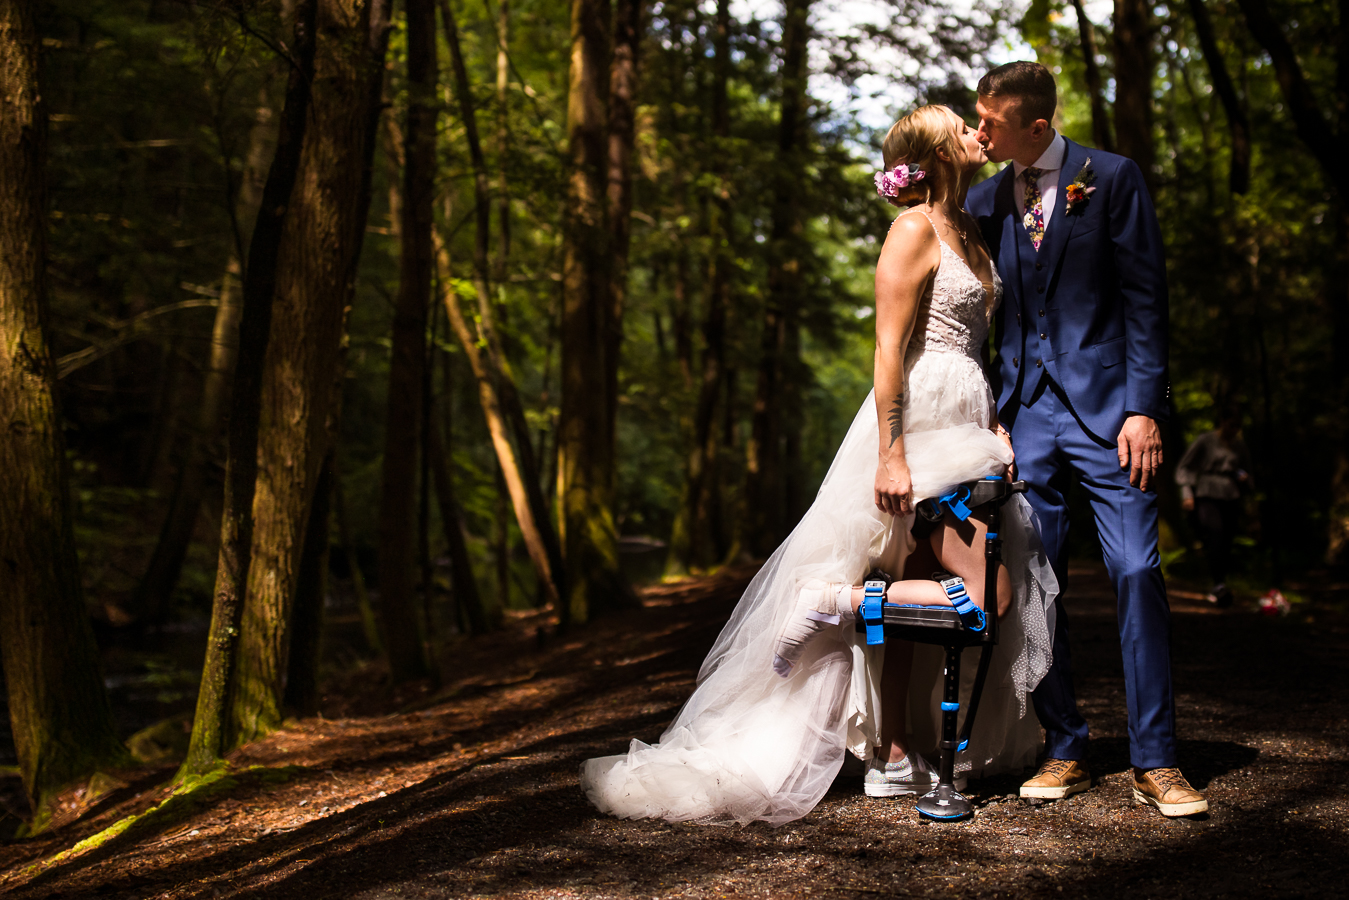 Micro wedding photographer, lisa rhinehart, captures this bride and groom as they kiss one another underneath the trees on a hiking trail showing off the bride's shattered foot from a biking accident